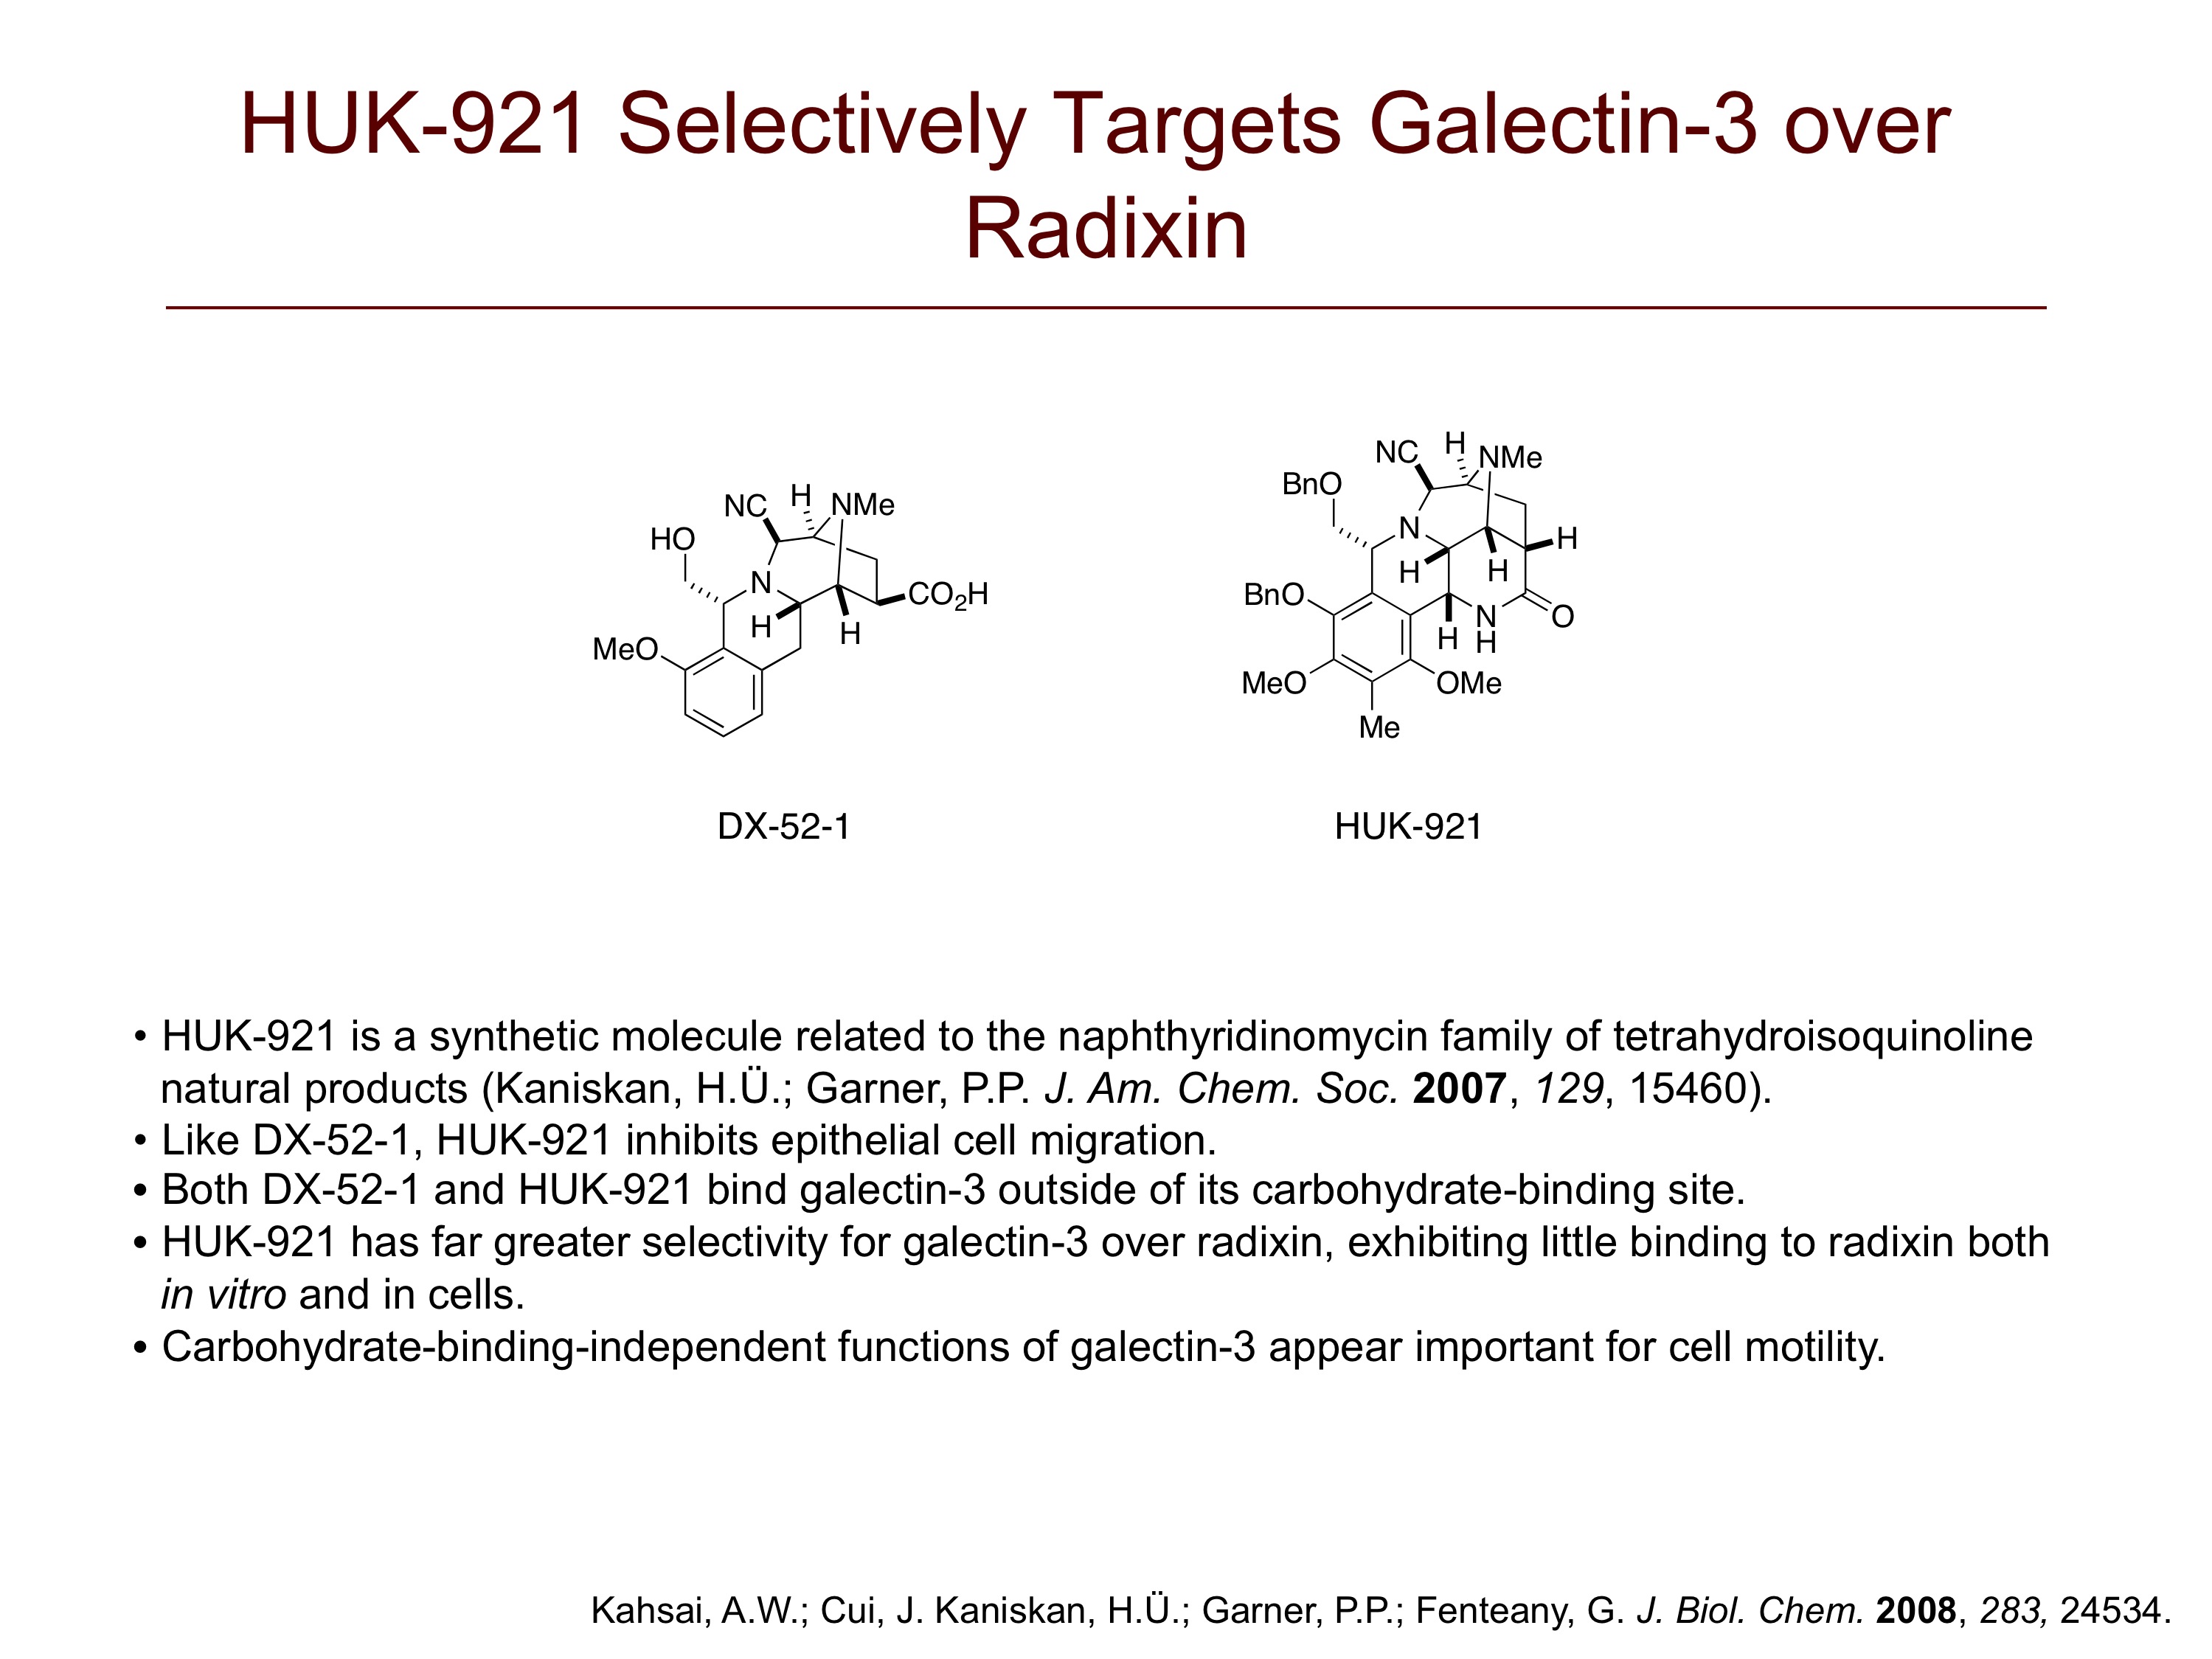 HUK-921 More Selective for Galectin-3 over Radixin